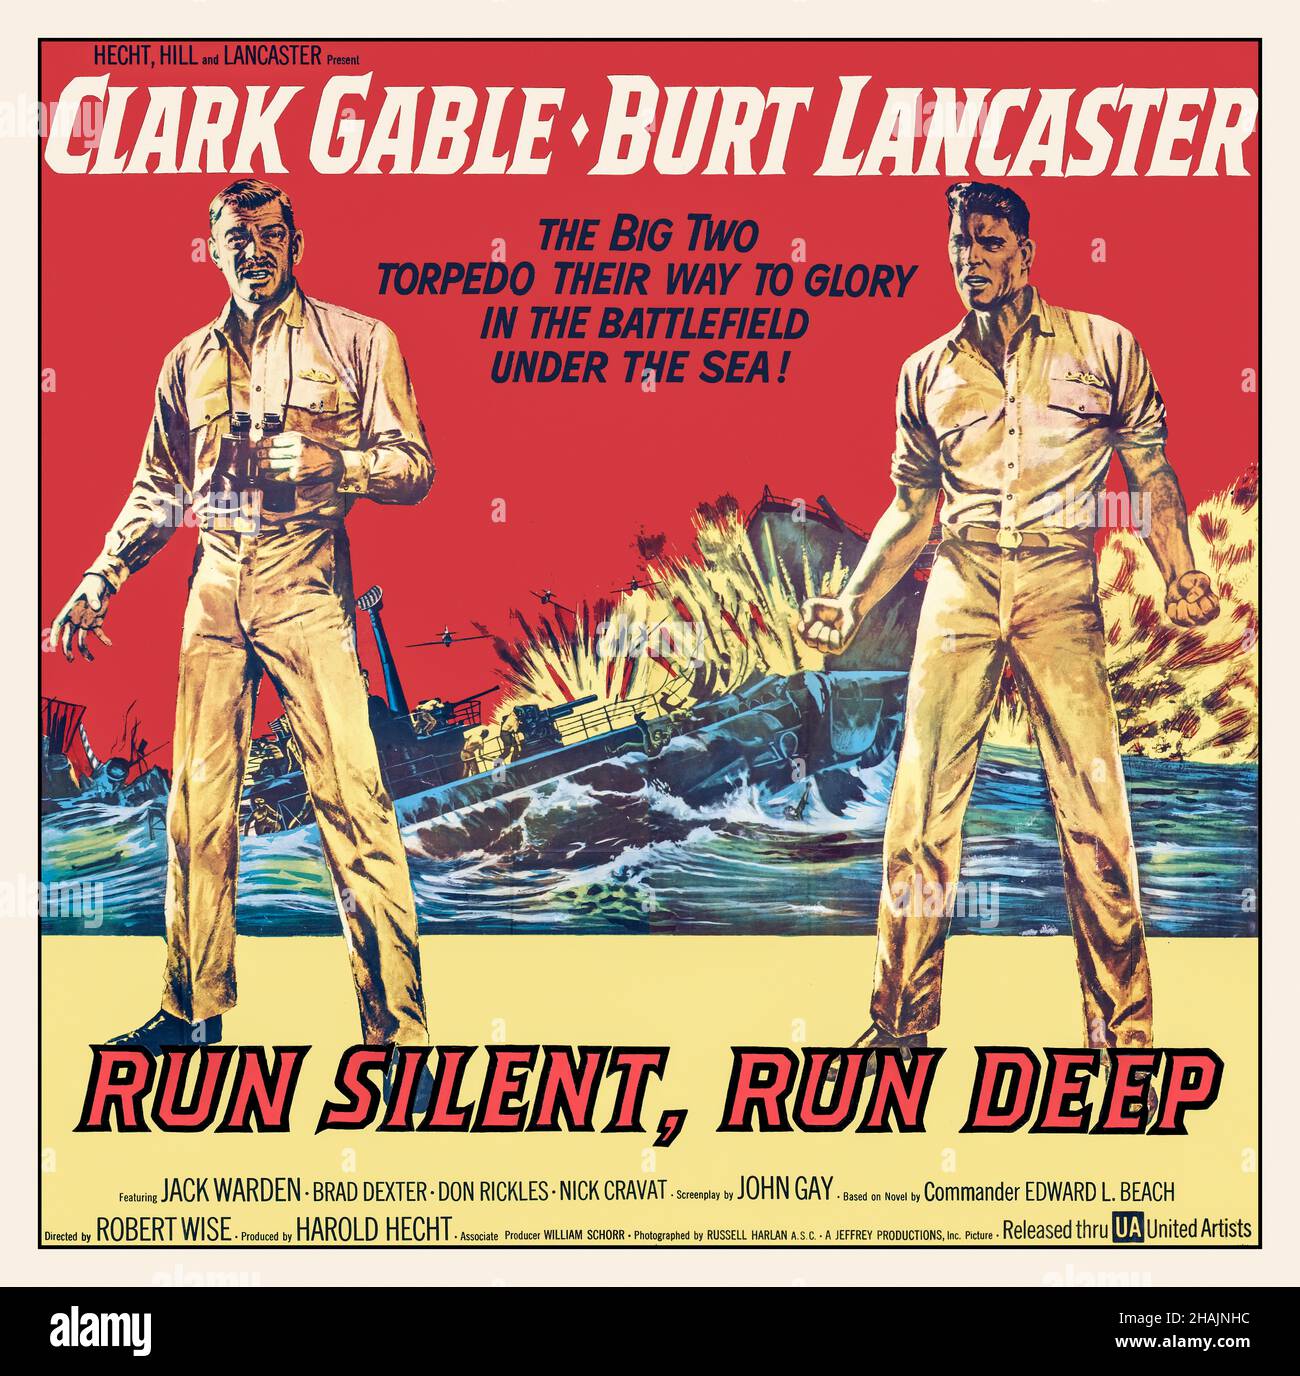 Vintage Movie Film Poster 'Run Silent, Run Deep' is a 1958 American black-and-white war film from United Artists, based on the 1955 novel of the same name by Commander (later Captain) Edward L. Beach Jr.. It was directed by Robert Wise, produced by Harold Hecht, and starred Clark Gable and Burt Lancaster. The title refers to 'silent running', a submarine stealth tactic. The story describes World War II submarine warfare in the Pacific Ocean,  In addition to Gable and Lancaster playing the leads, the film also features Jack Warden and was the film debut of Don Rickles. Stock Photo